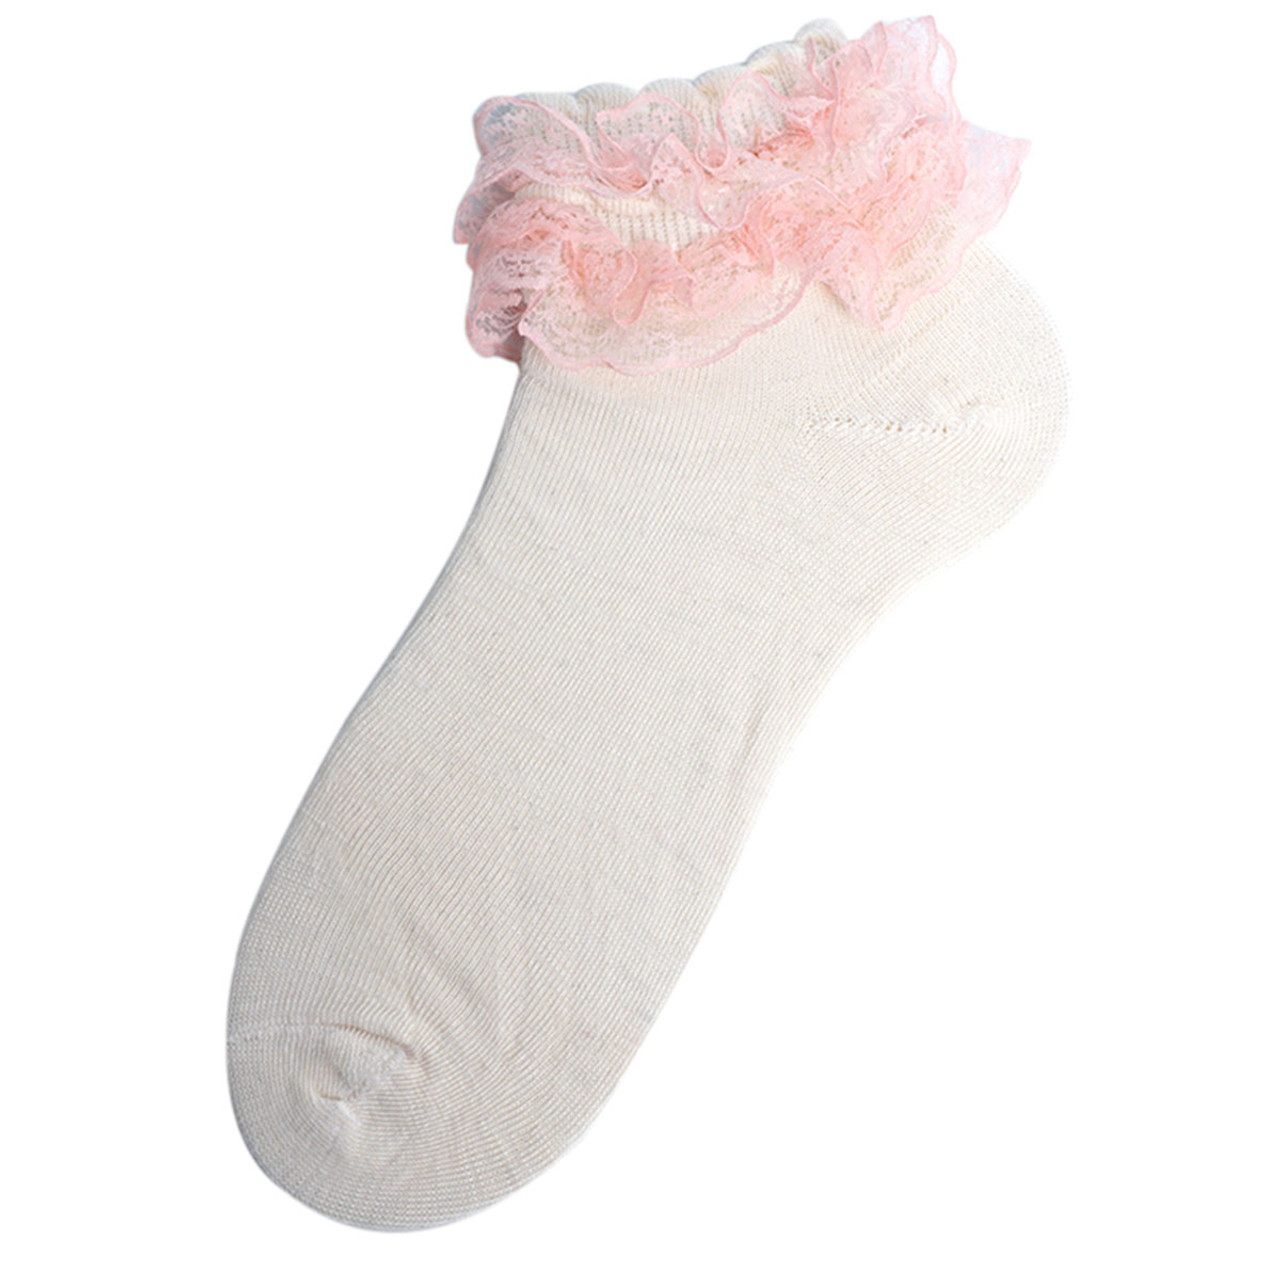 Lace frill ankle socks - dusty pink